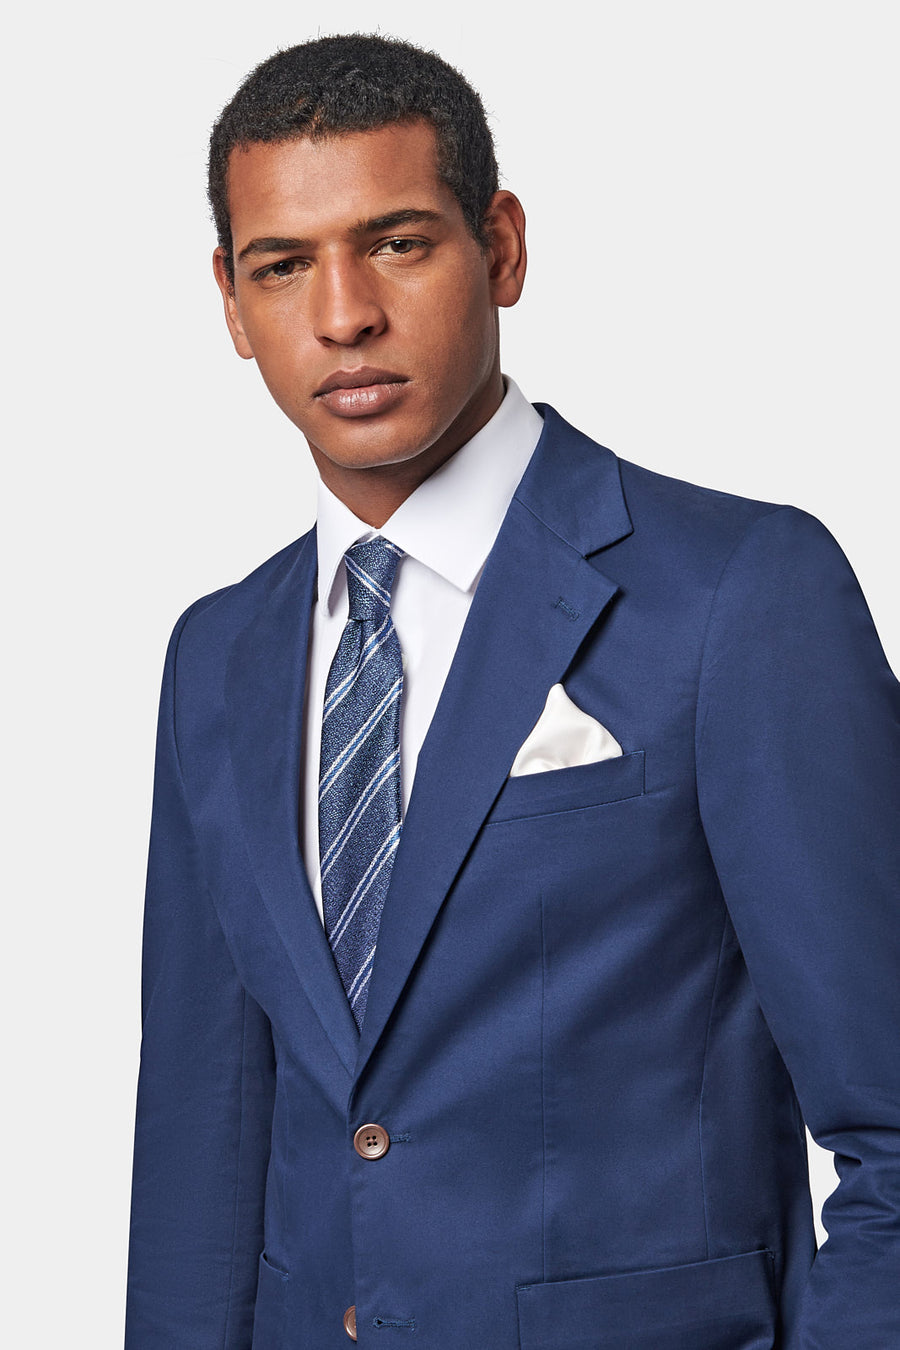 Contemporary Notched Lapel Suit Jacket in Navy Blue